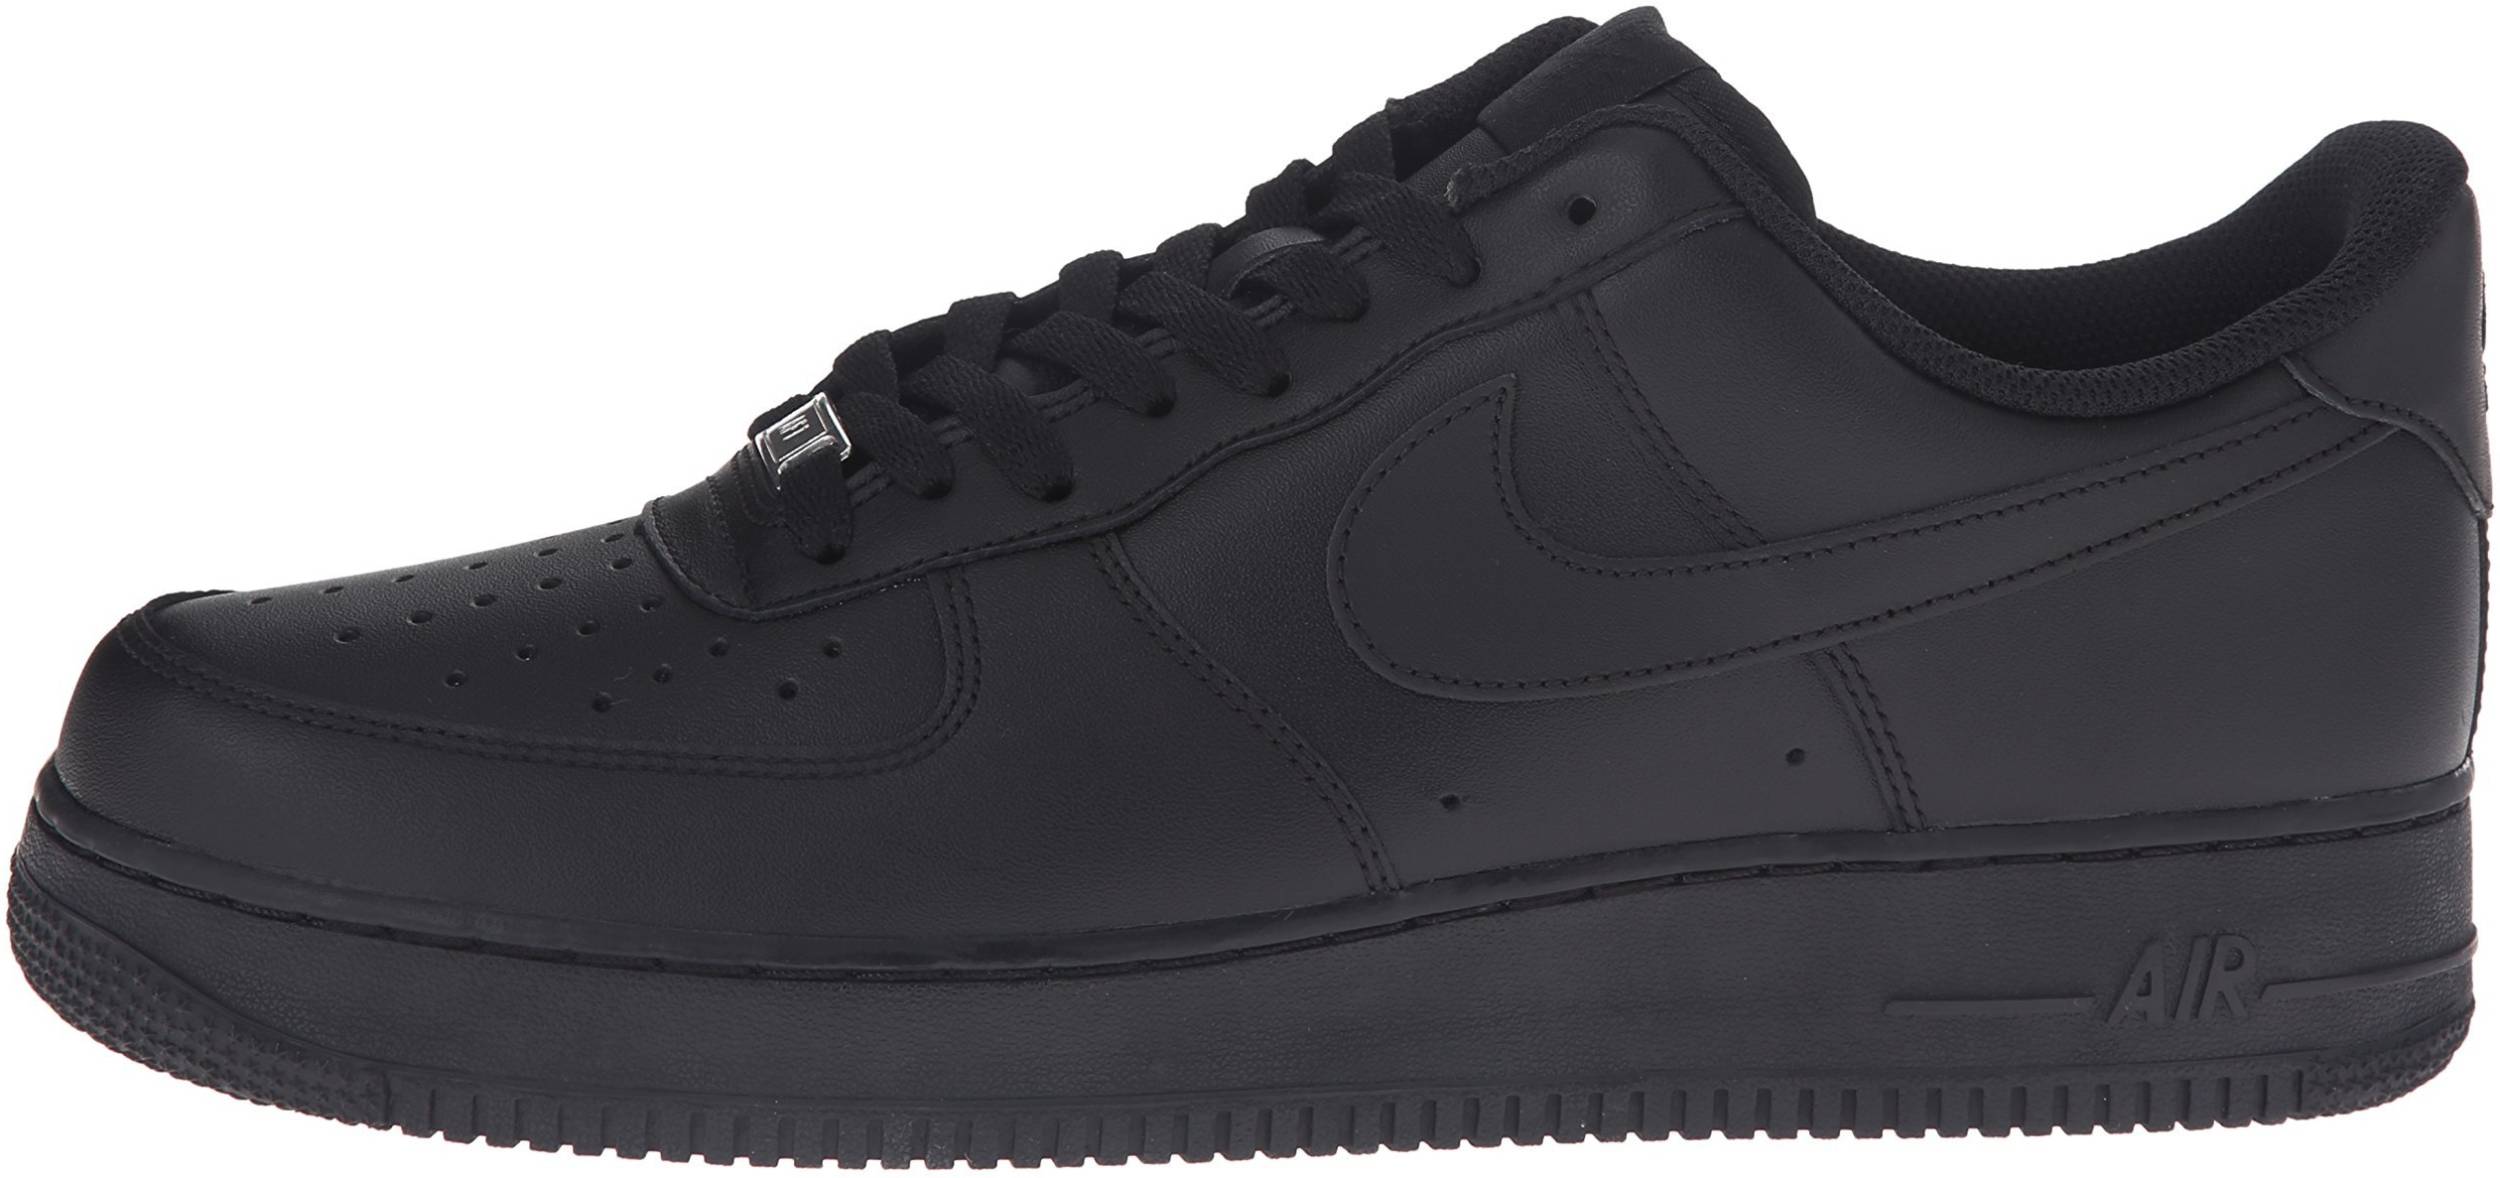 best nike air force 1 low